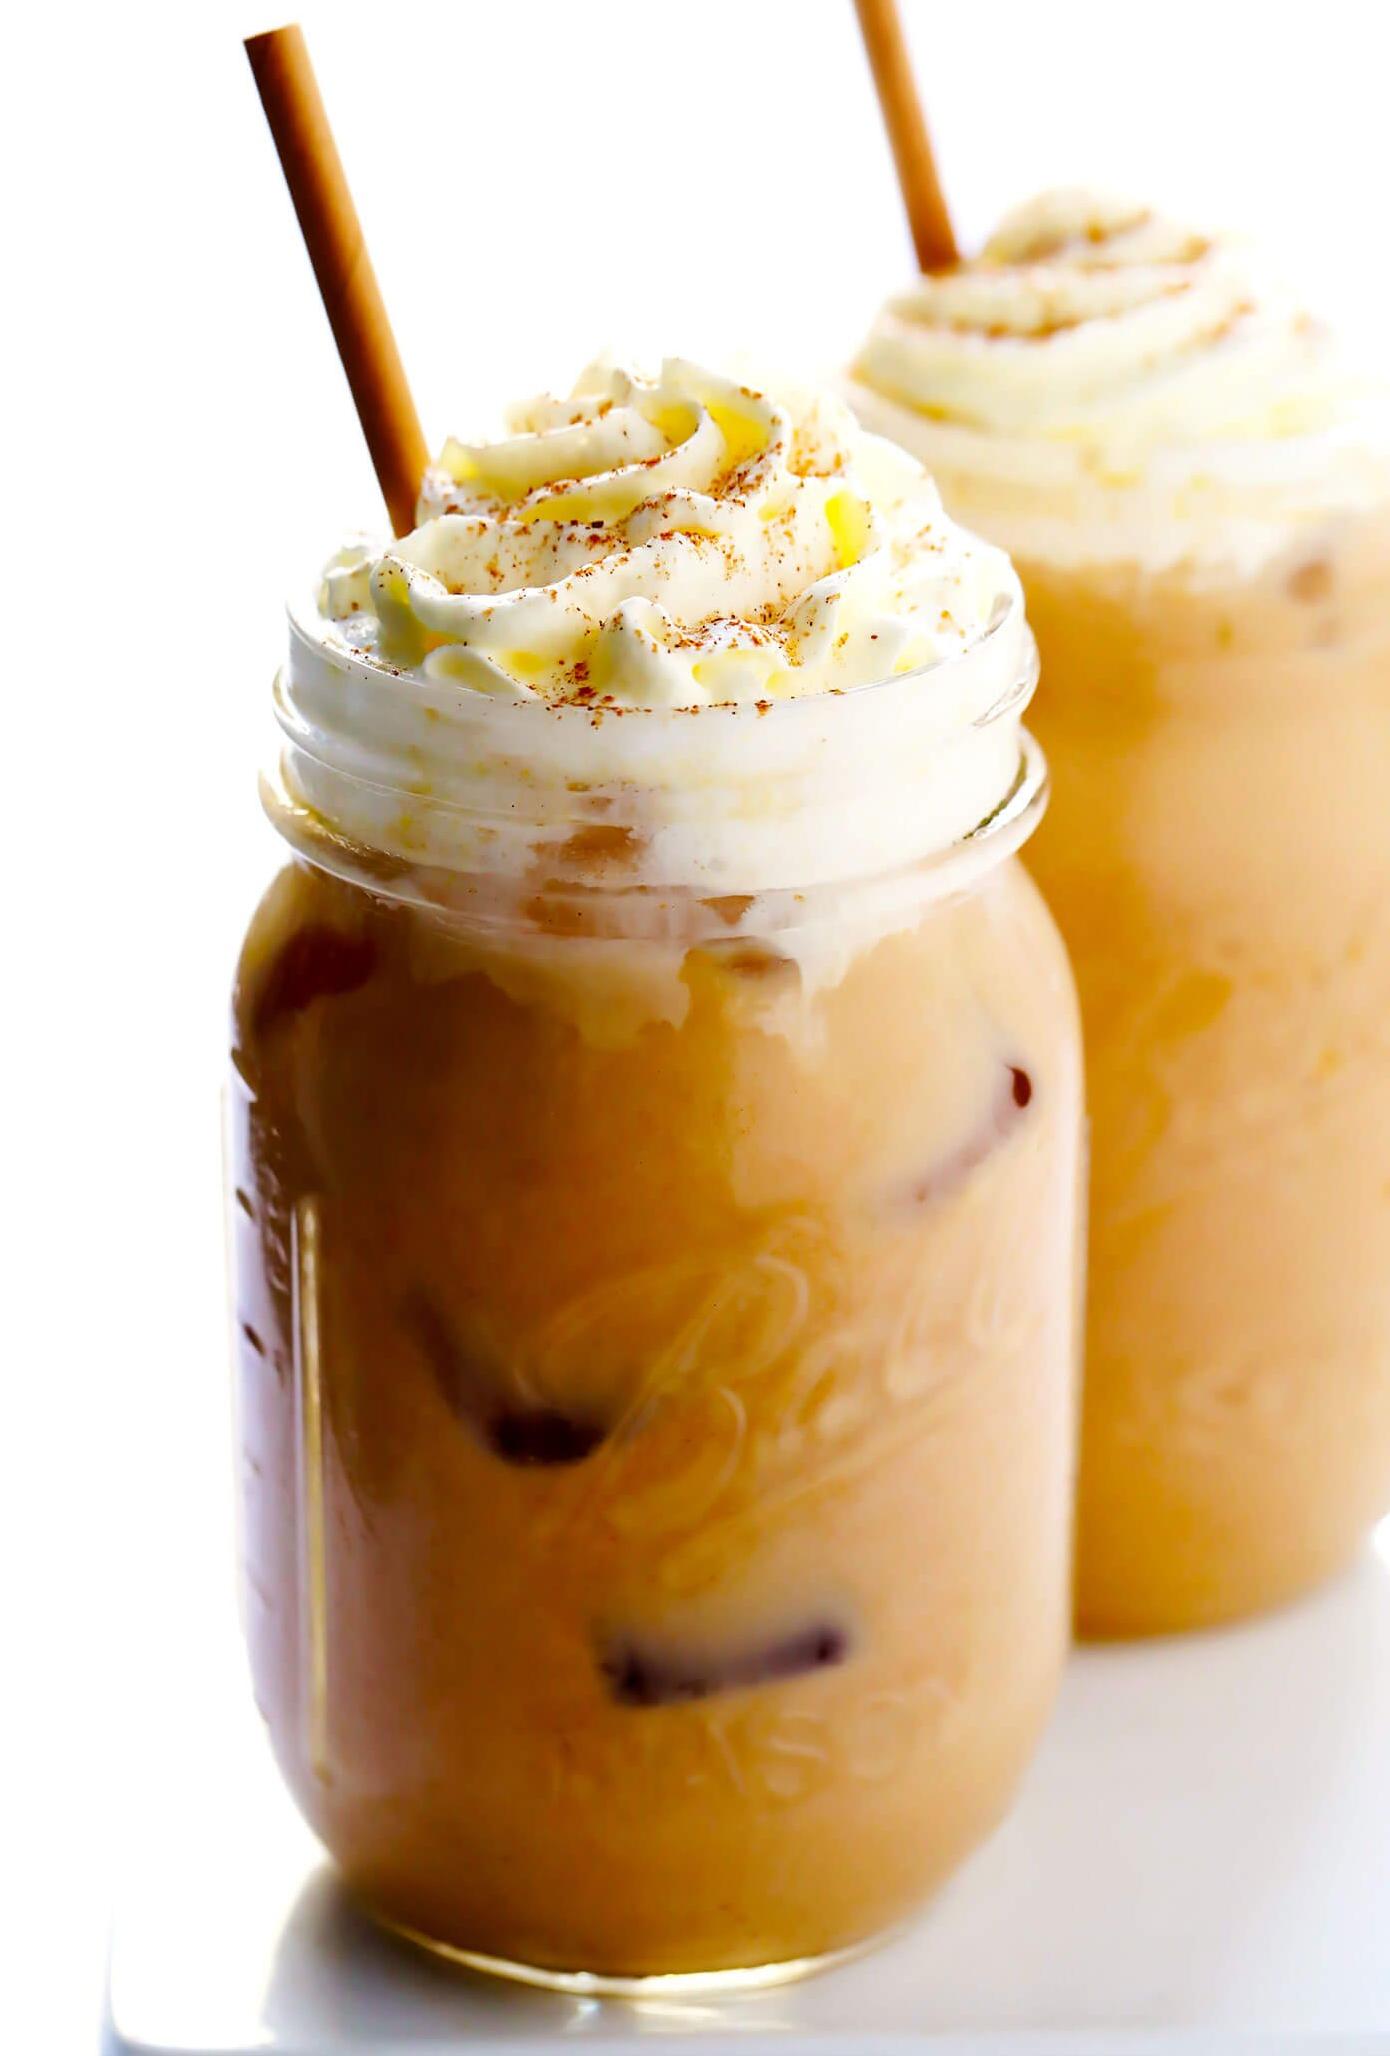  Who says iced coffee is only for summers?